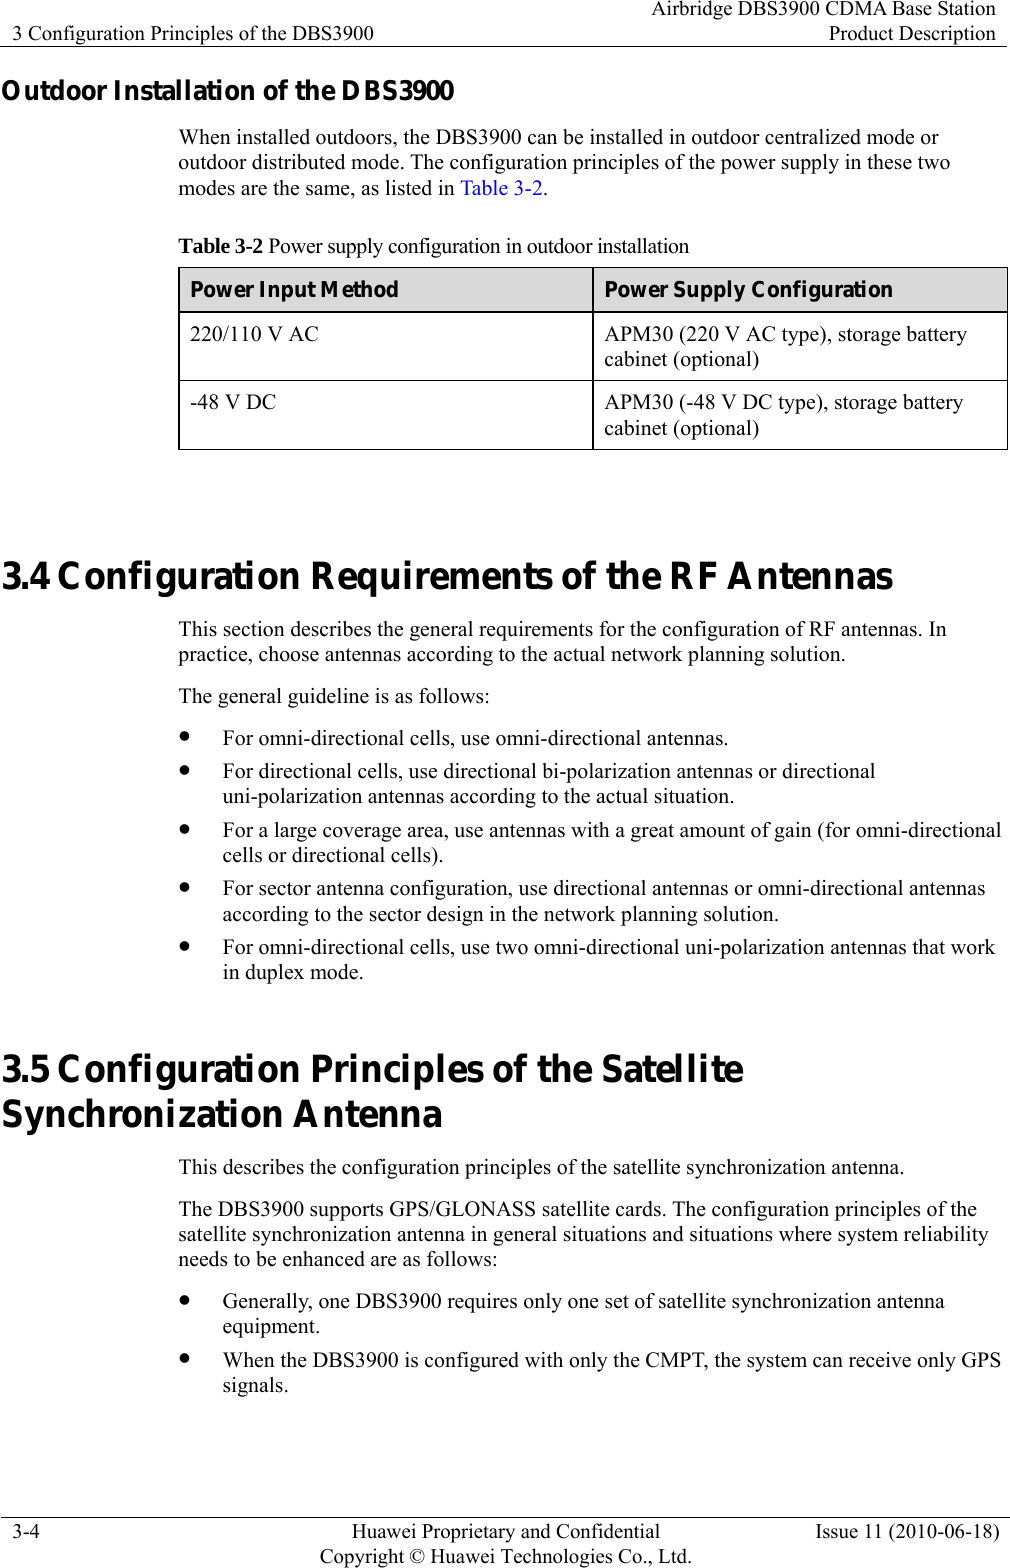 3 Configuration Principles of the DBS3900 Airbridge DBS3900 CDMA Base StationProduct Description 3-4  Huawei Proprietary and Confidential     Copyright © Huawei Technologies Co., Ltd.Issue 11 (2010-06-18) Outdoor Installation of the DBS3900 When installed outdoors, the DBS3900 can be installed in outdoor centralized mode or outdoor distributed mode. The configuration principles of the power supply in these two modes are the same, as listed in Table 3-2. Table 3-2 Power supply configuration in outdoor installation Power Input Method  Power Supply Configuration 220/110 V AC  APM30 (220 V AC type), storage battery cabinet (optional) -48 V DC  APM30 (-48 V DC type), storage battery cabinet (optional)  3.4 Configuration Requirements of the RF Antennas This section describes the general requirements for the configuration of RF antennas. In practice, choose antennas according to the actual network planning solution. The general guideline is as follows: z For omni-directional cells, use omni-directional antennas. z For directional cells, use directional bi-polarization antennas or directional uni-polarization antennas according to the actual situation. z For a large coverage area, use antennas with a great amount of gain (for omni-directional cells or directional cells). z For sector antenna configuration, use directional antennas or omni-directional antennas according to the sector design in the network planning solution. z For omni-directional cells, use two omni-directional uni-polarization antennas that work in duplex mode. 3.5 Configuration Principles of the Satellite Synchronization Antenna This describes the configuration principles of the satellite synchronization antenna. The DBS3900 supports GPS/GLONASS satellite cards. The configuration principles of the satellite synchronization antenna in general situations and situations where system reliability needs to be enhanced are as follows: z Generally, one DBS3900 requires only one set of satellite synchronization antenna equipment. z When the DBS3900 is configured with only the CMPT, the system can receive only GPS signals. 